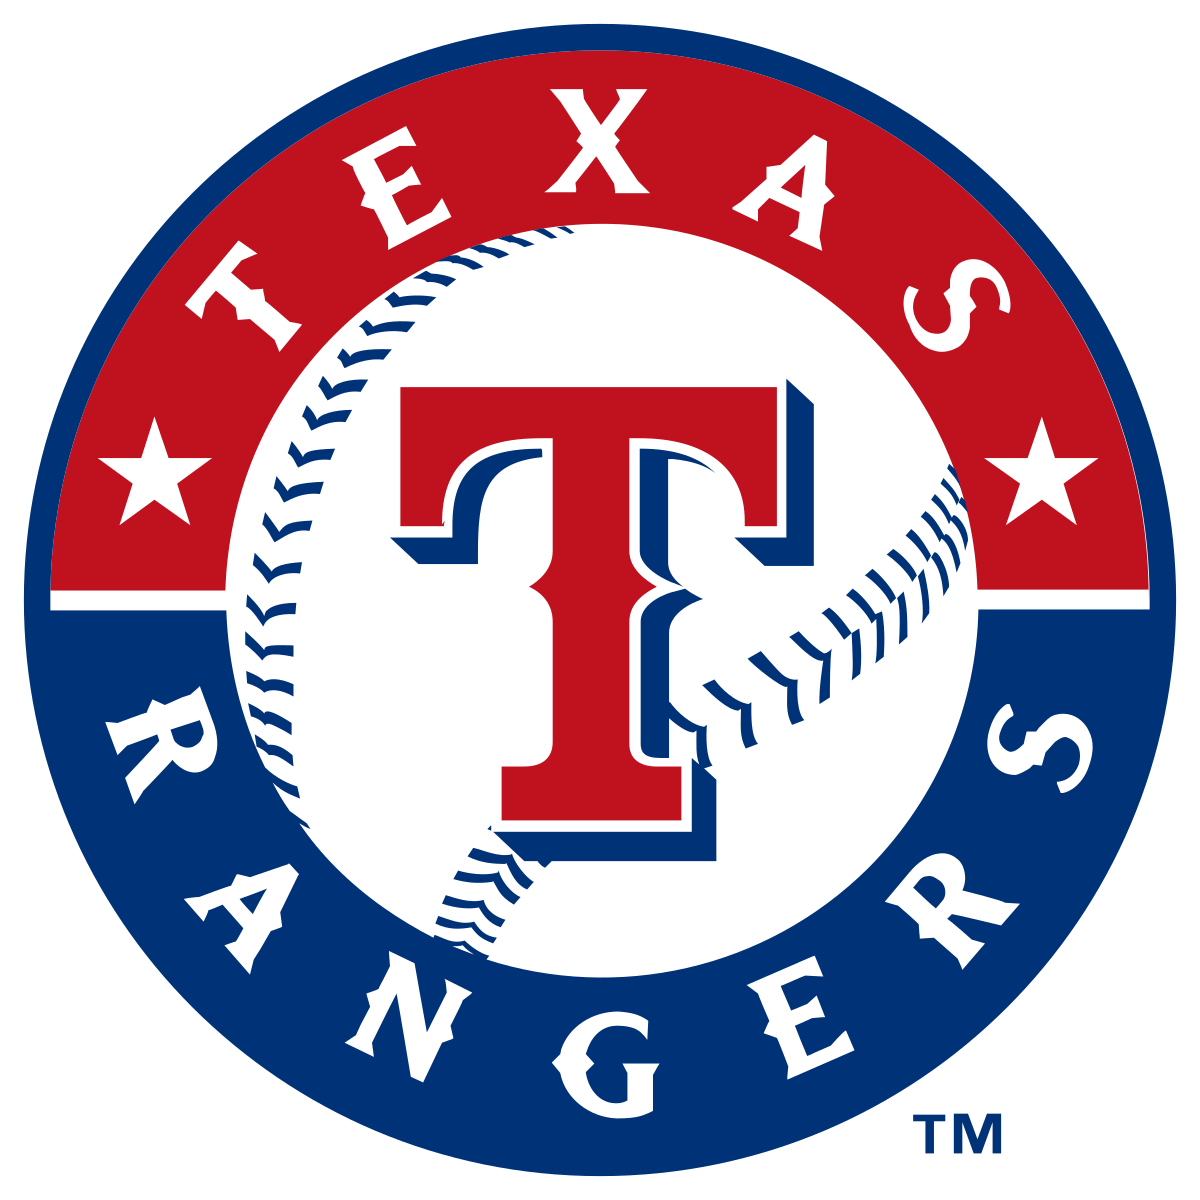 Presale Codes to purchase tickets for Texas Rangers 2016 Postseason games